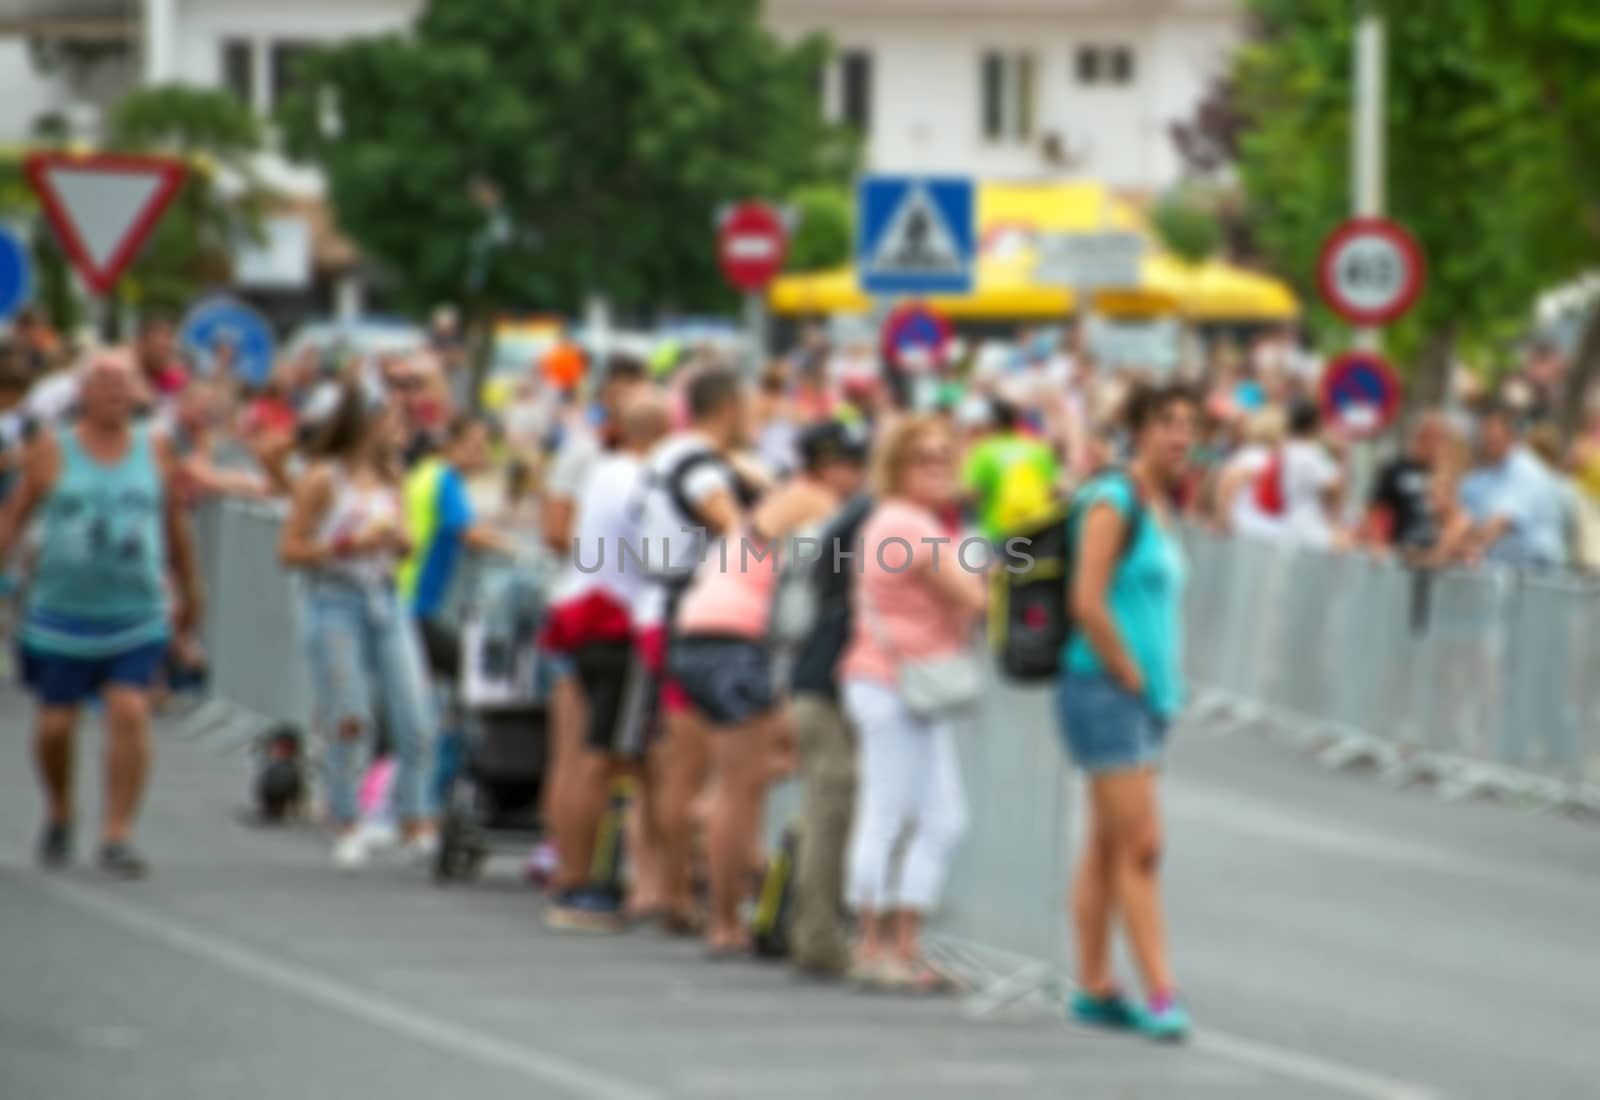 People during the competition. Blurred image.